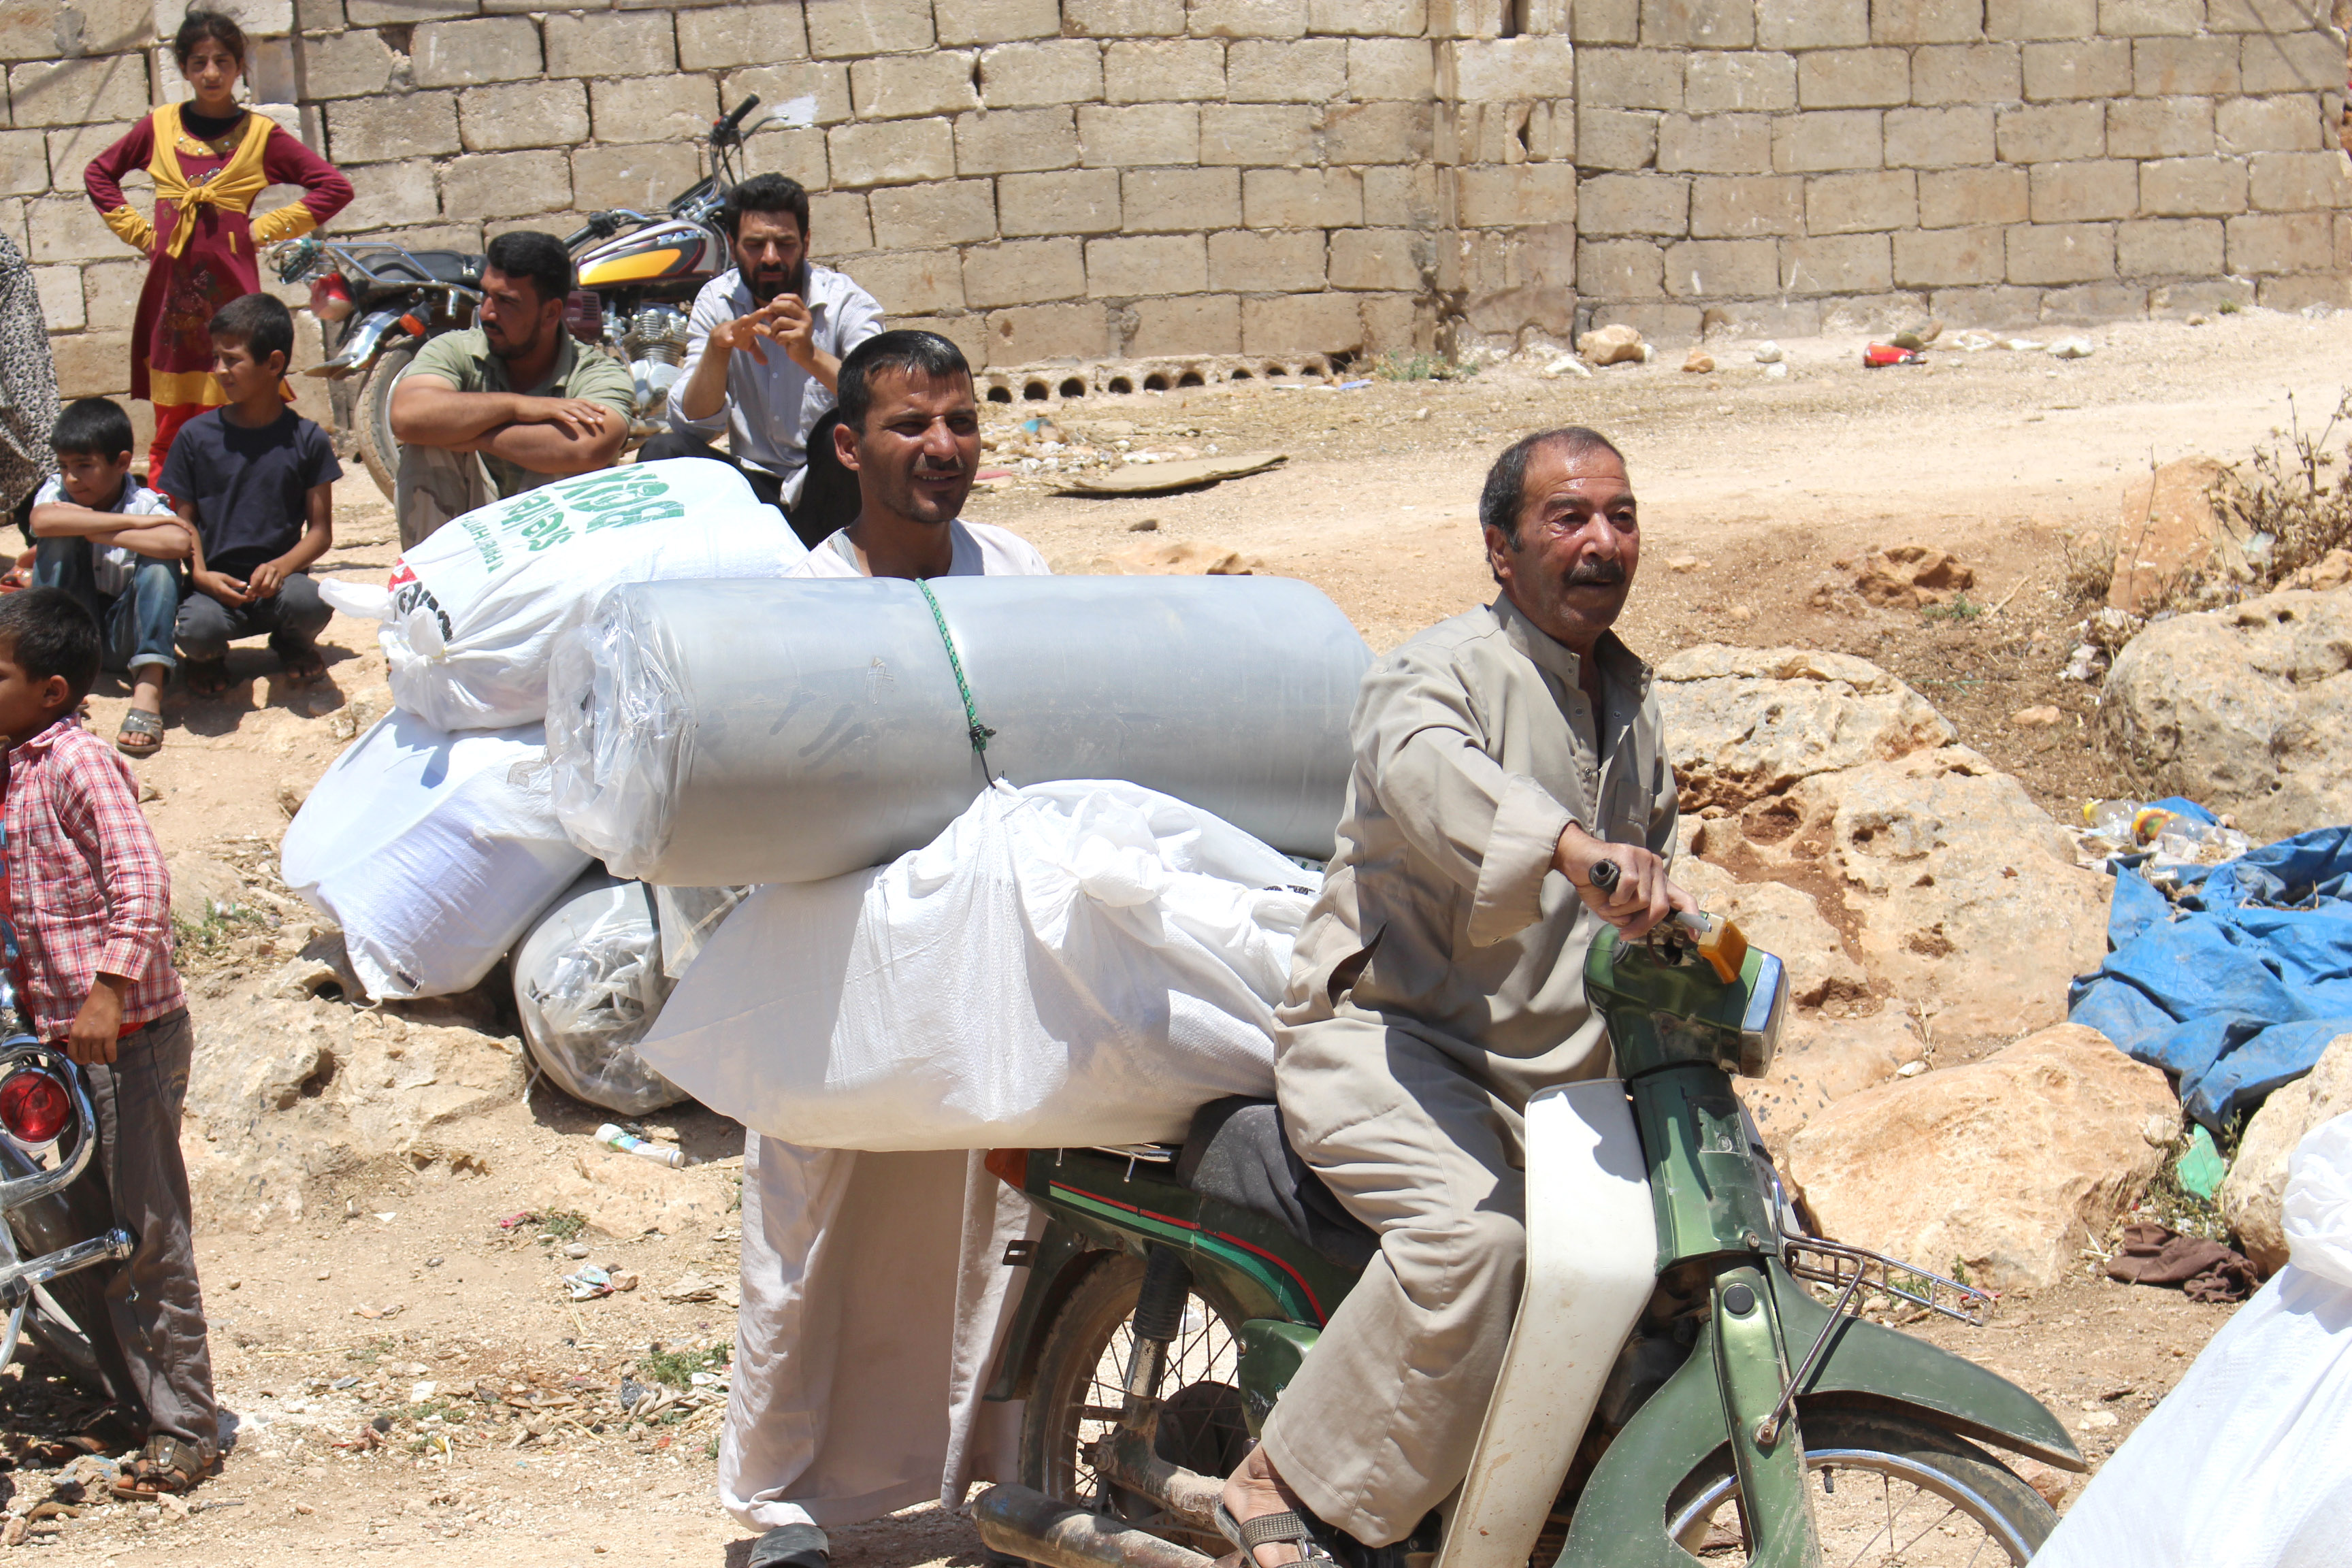 Carrying a tarpaulin and other aid items by motorcycle